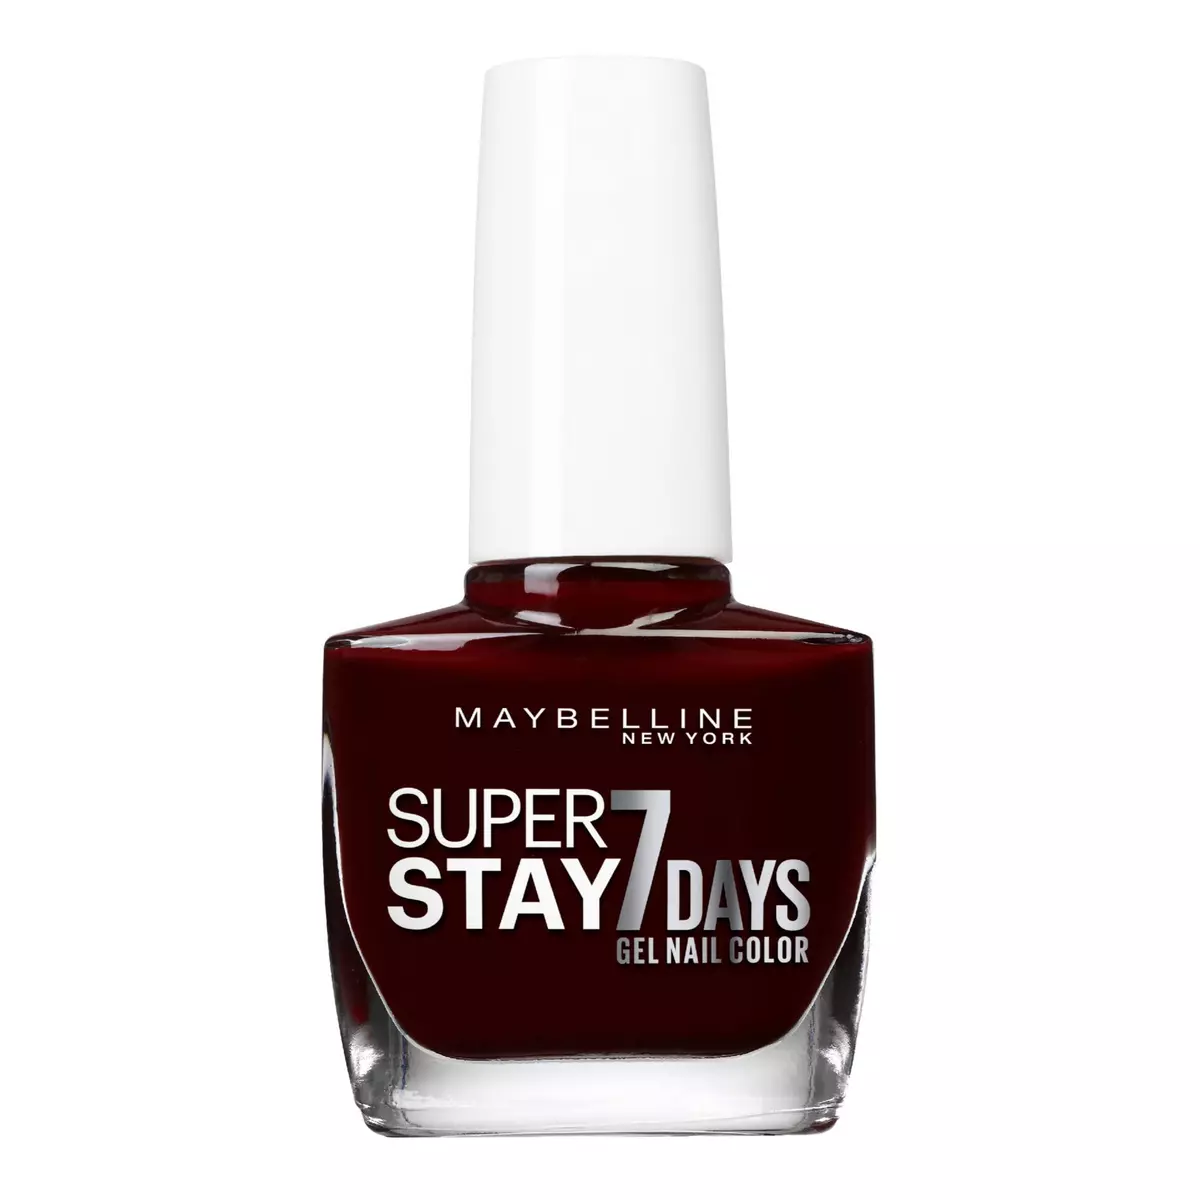 MAYBELLINE Tenue Strong Pro vernis à ongles gel rouge Couture Superstay 7 days 10ml